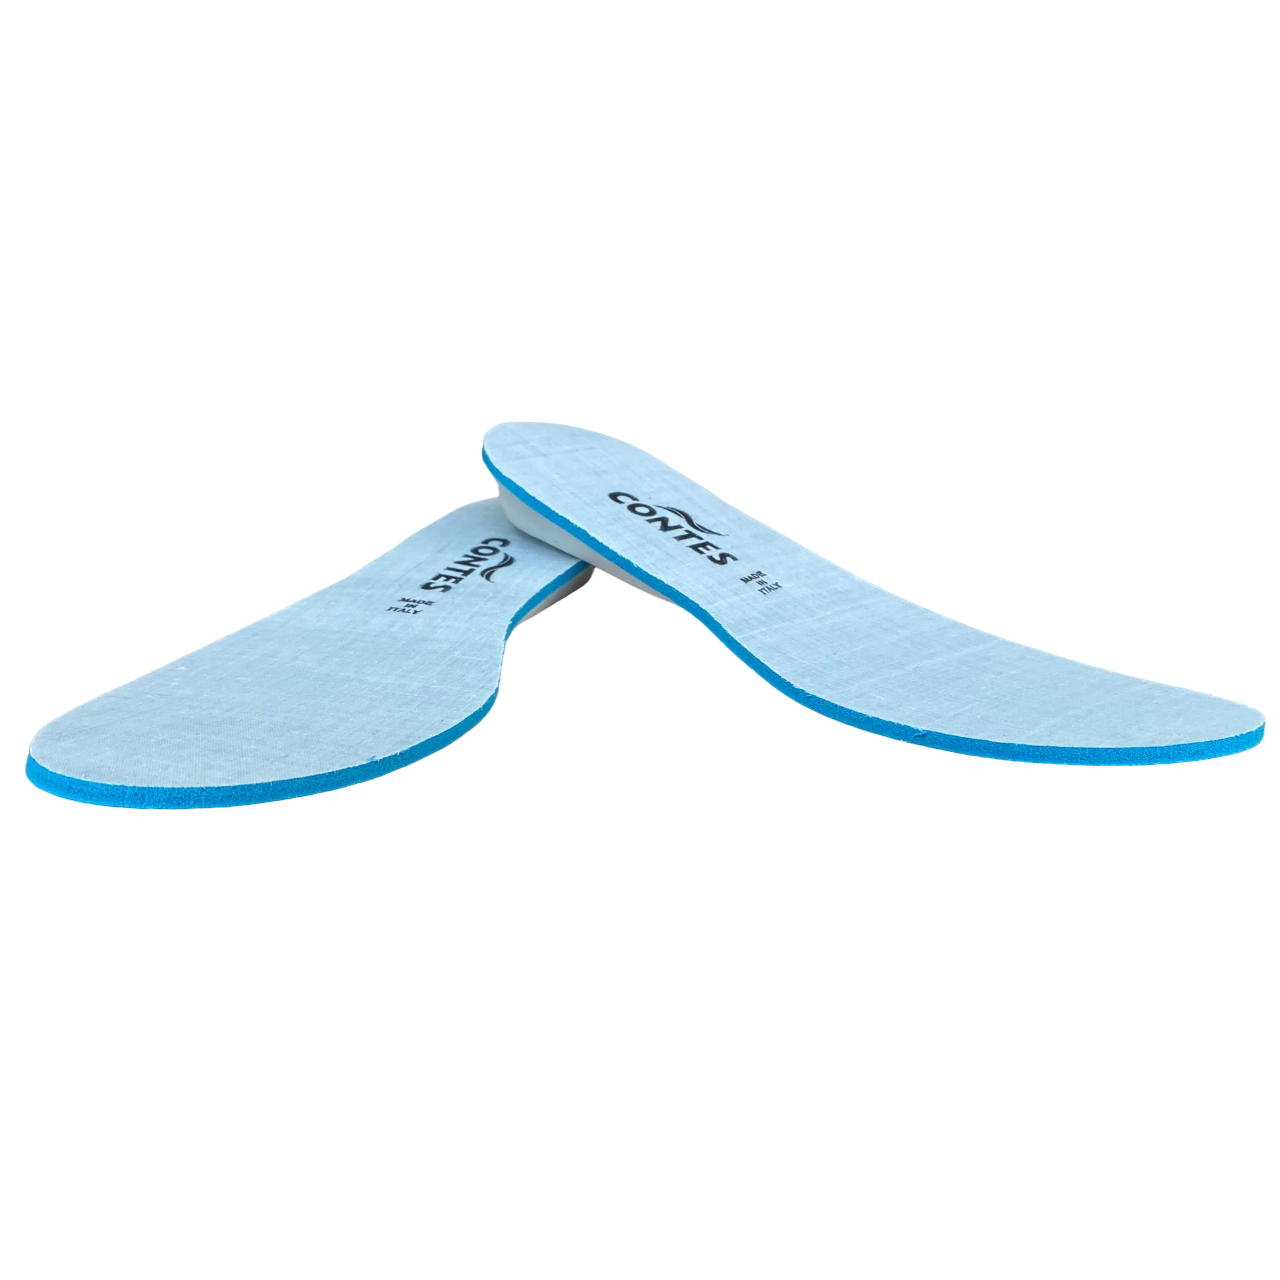 Contes 5 mm Gel foam insole with 2 cm heel lift Model 520 height 2.5 cm (double number)